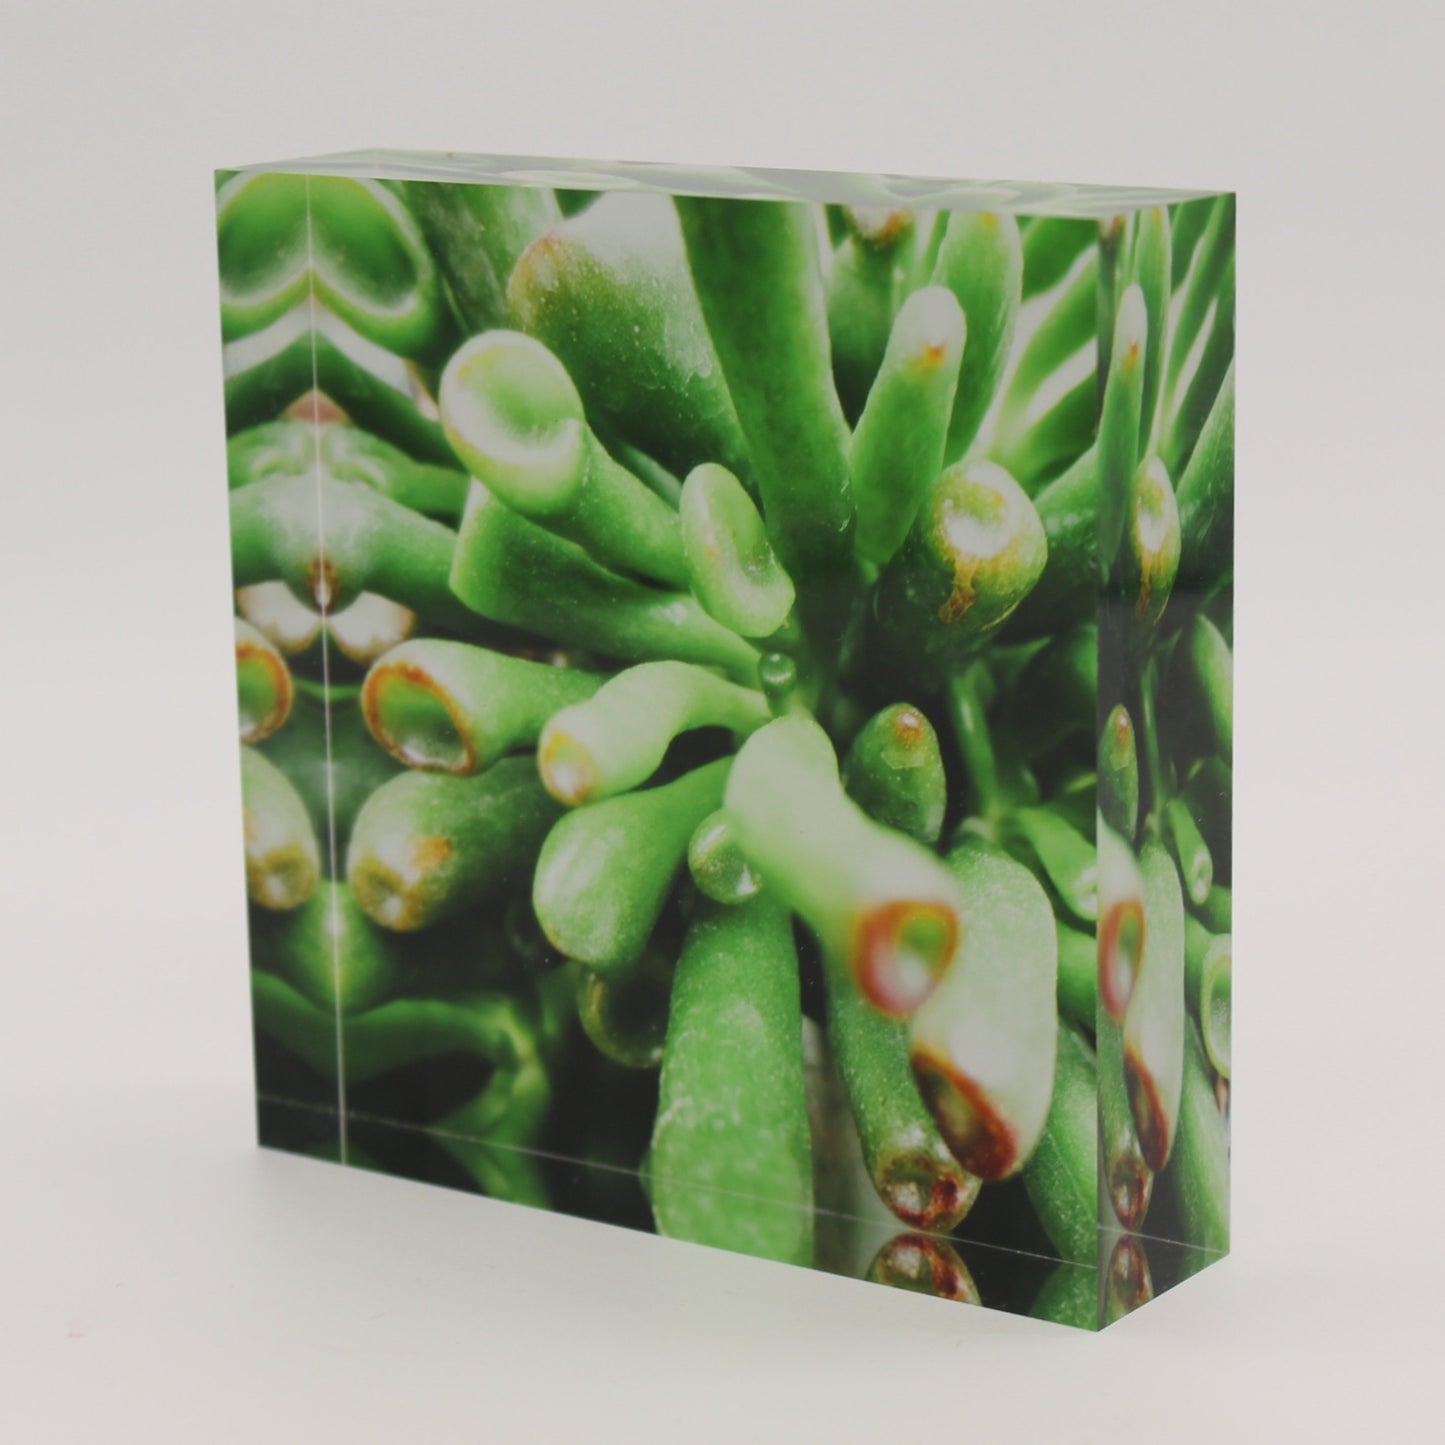 Tilted view of Acrylic block of close up view of green stems